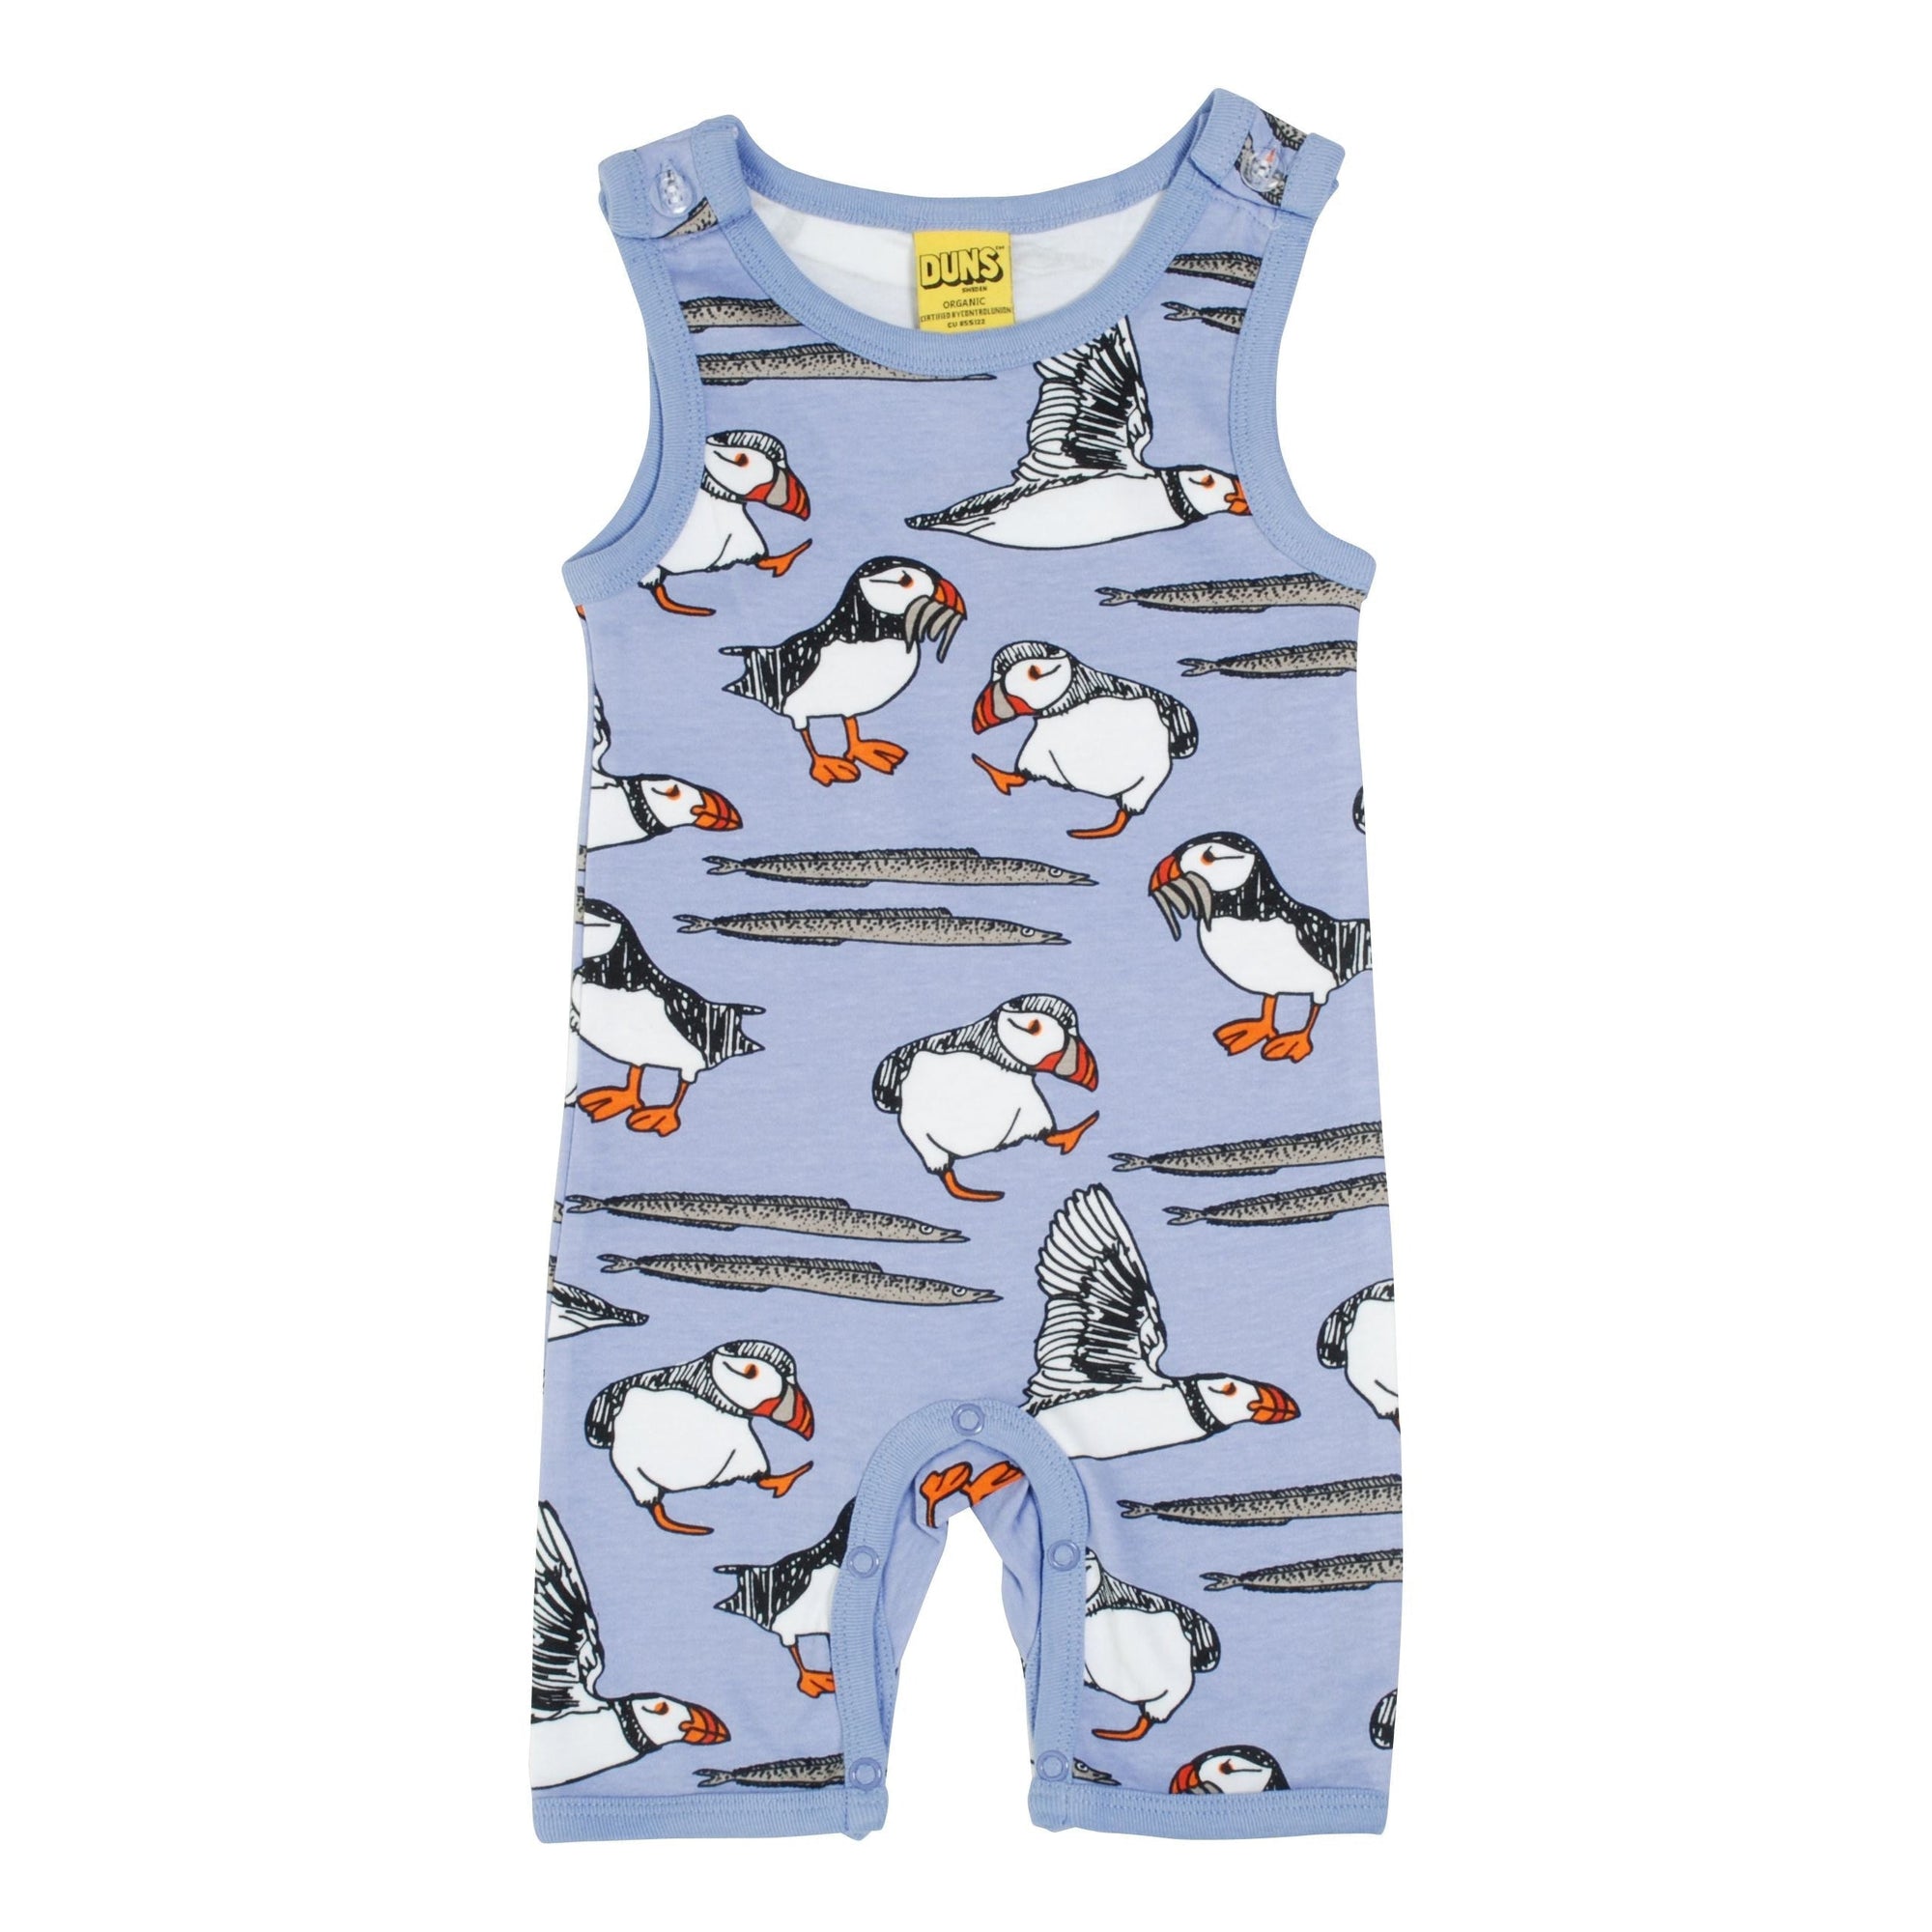 Puffins - Easter Egg Summer Dungarees - 2 Left Size 1-2 months & 6-7 years-Duns Sweden-Modern Rascals